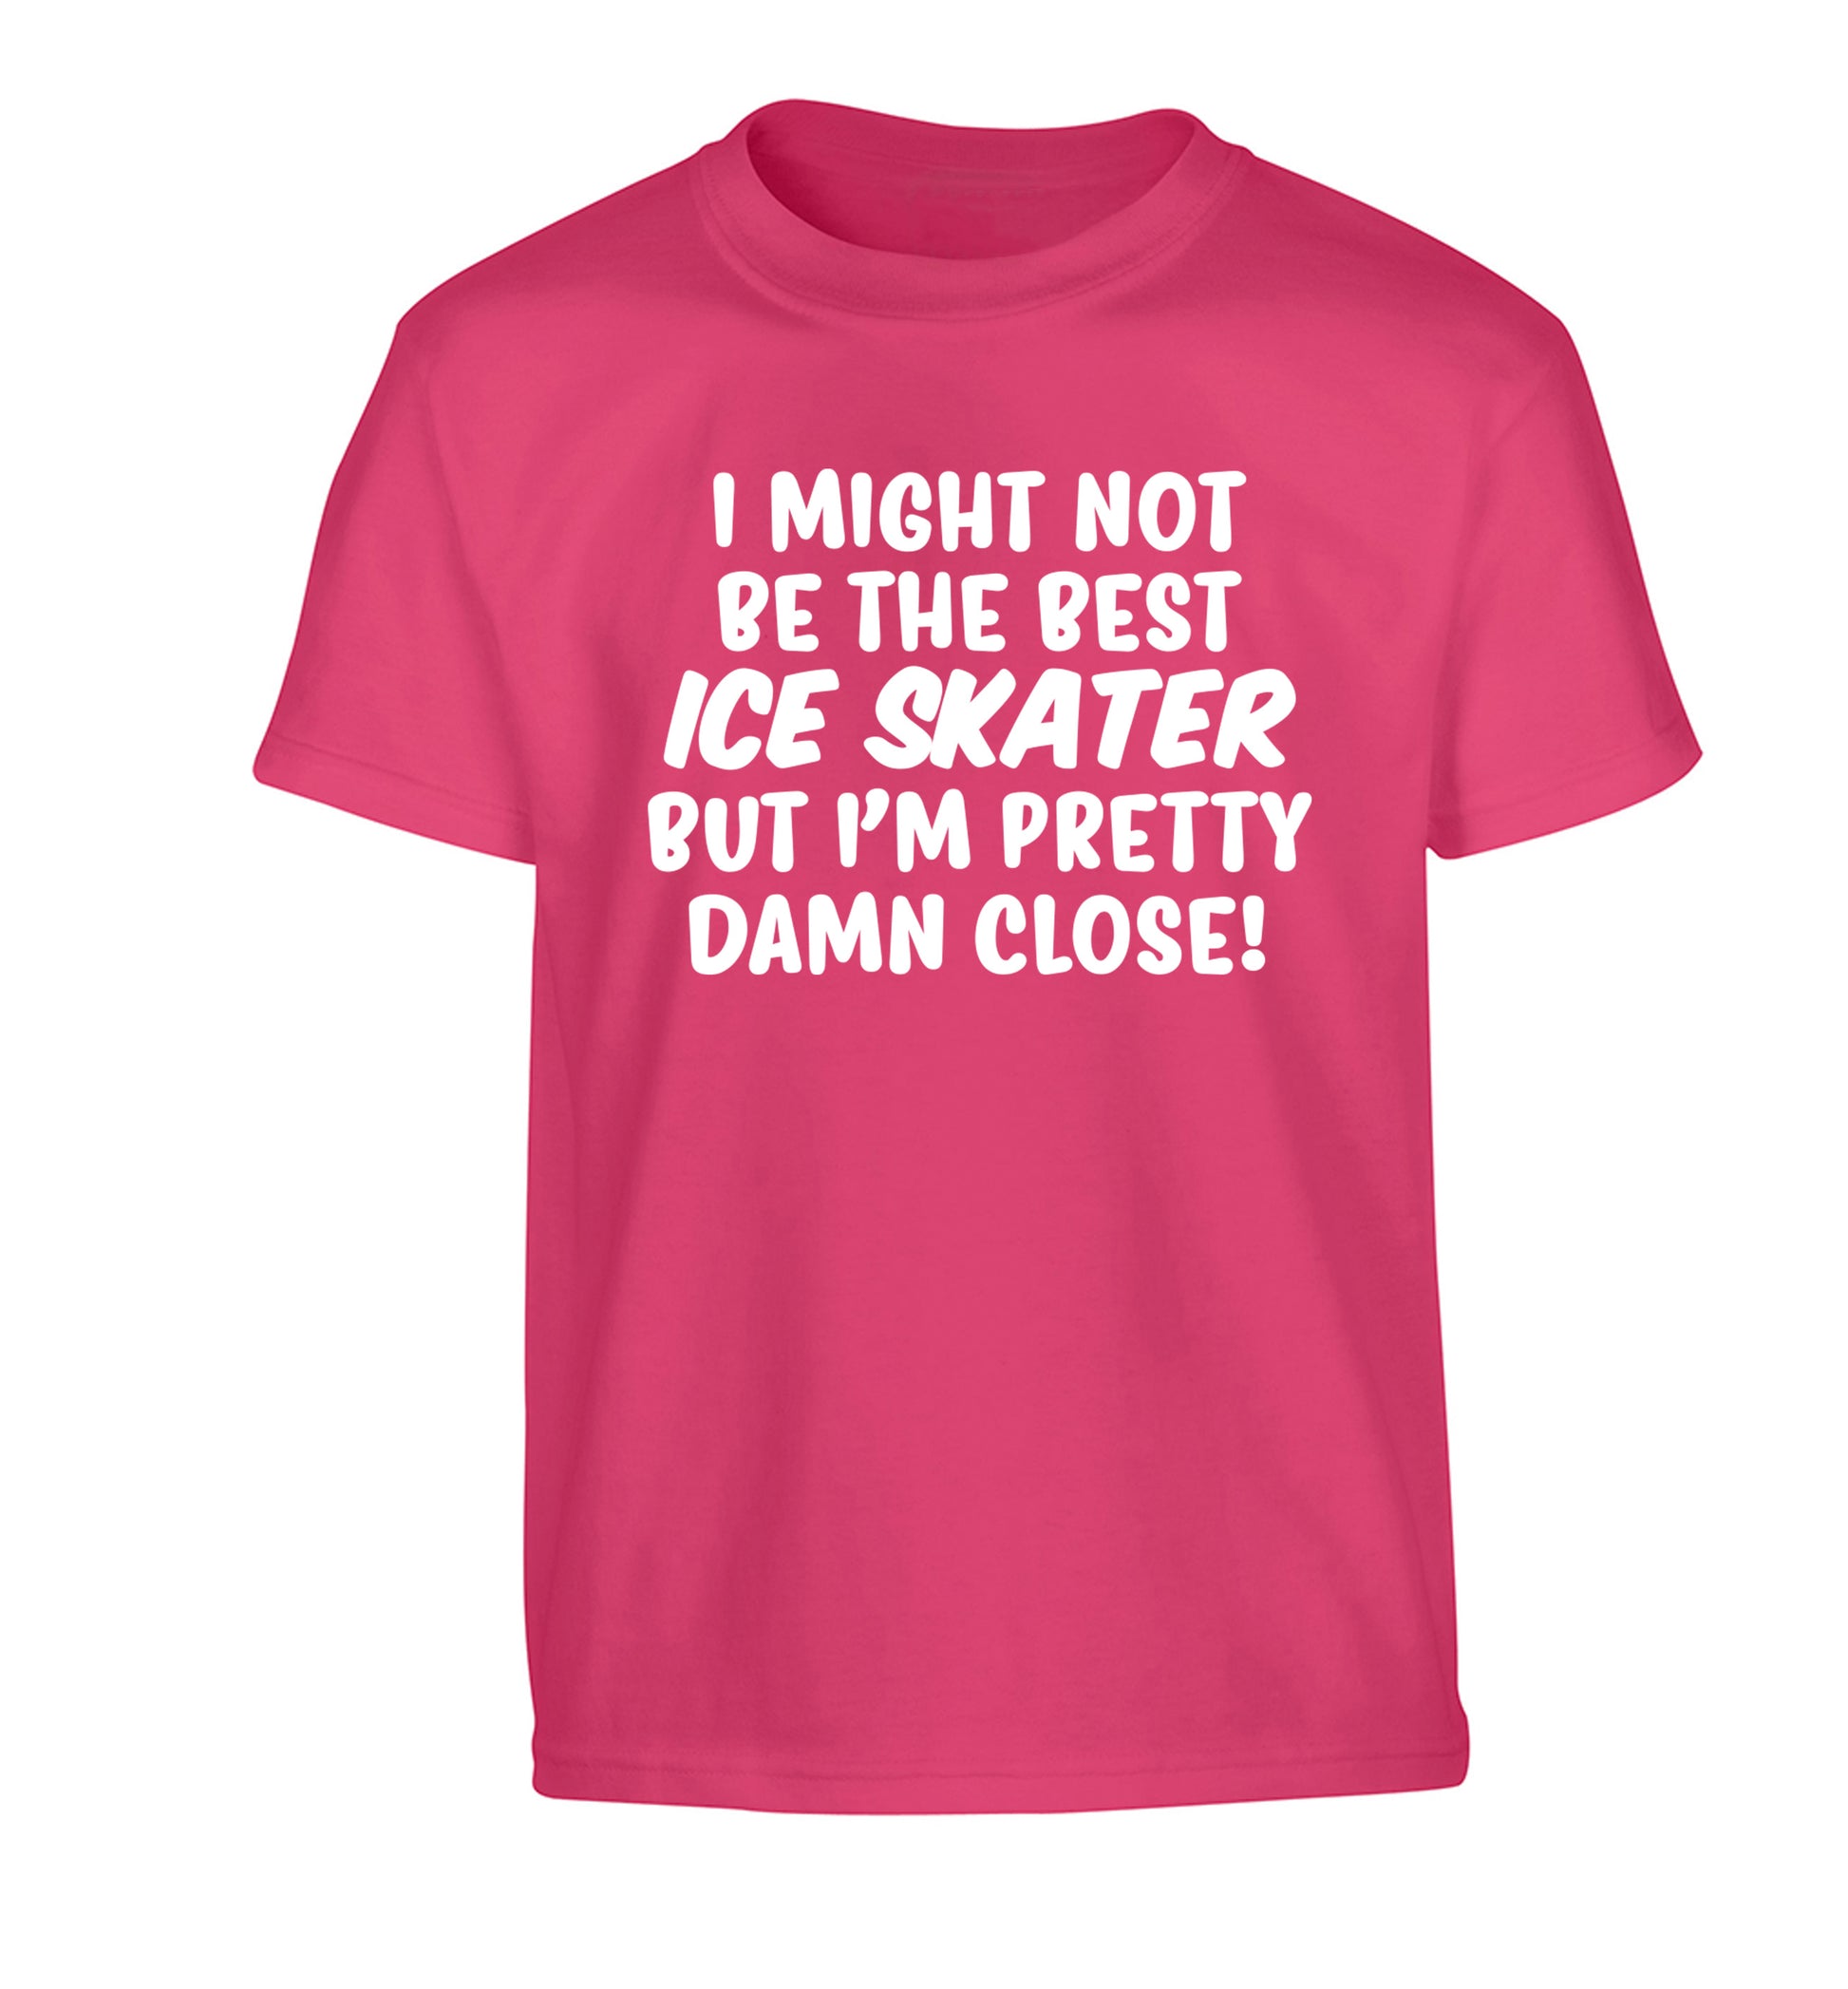 I might not be the best ice skater but I'm pretty damn close! Children's pink Tshirt 12-14 Years